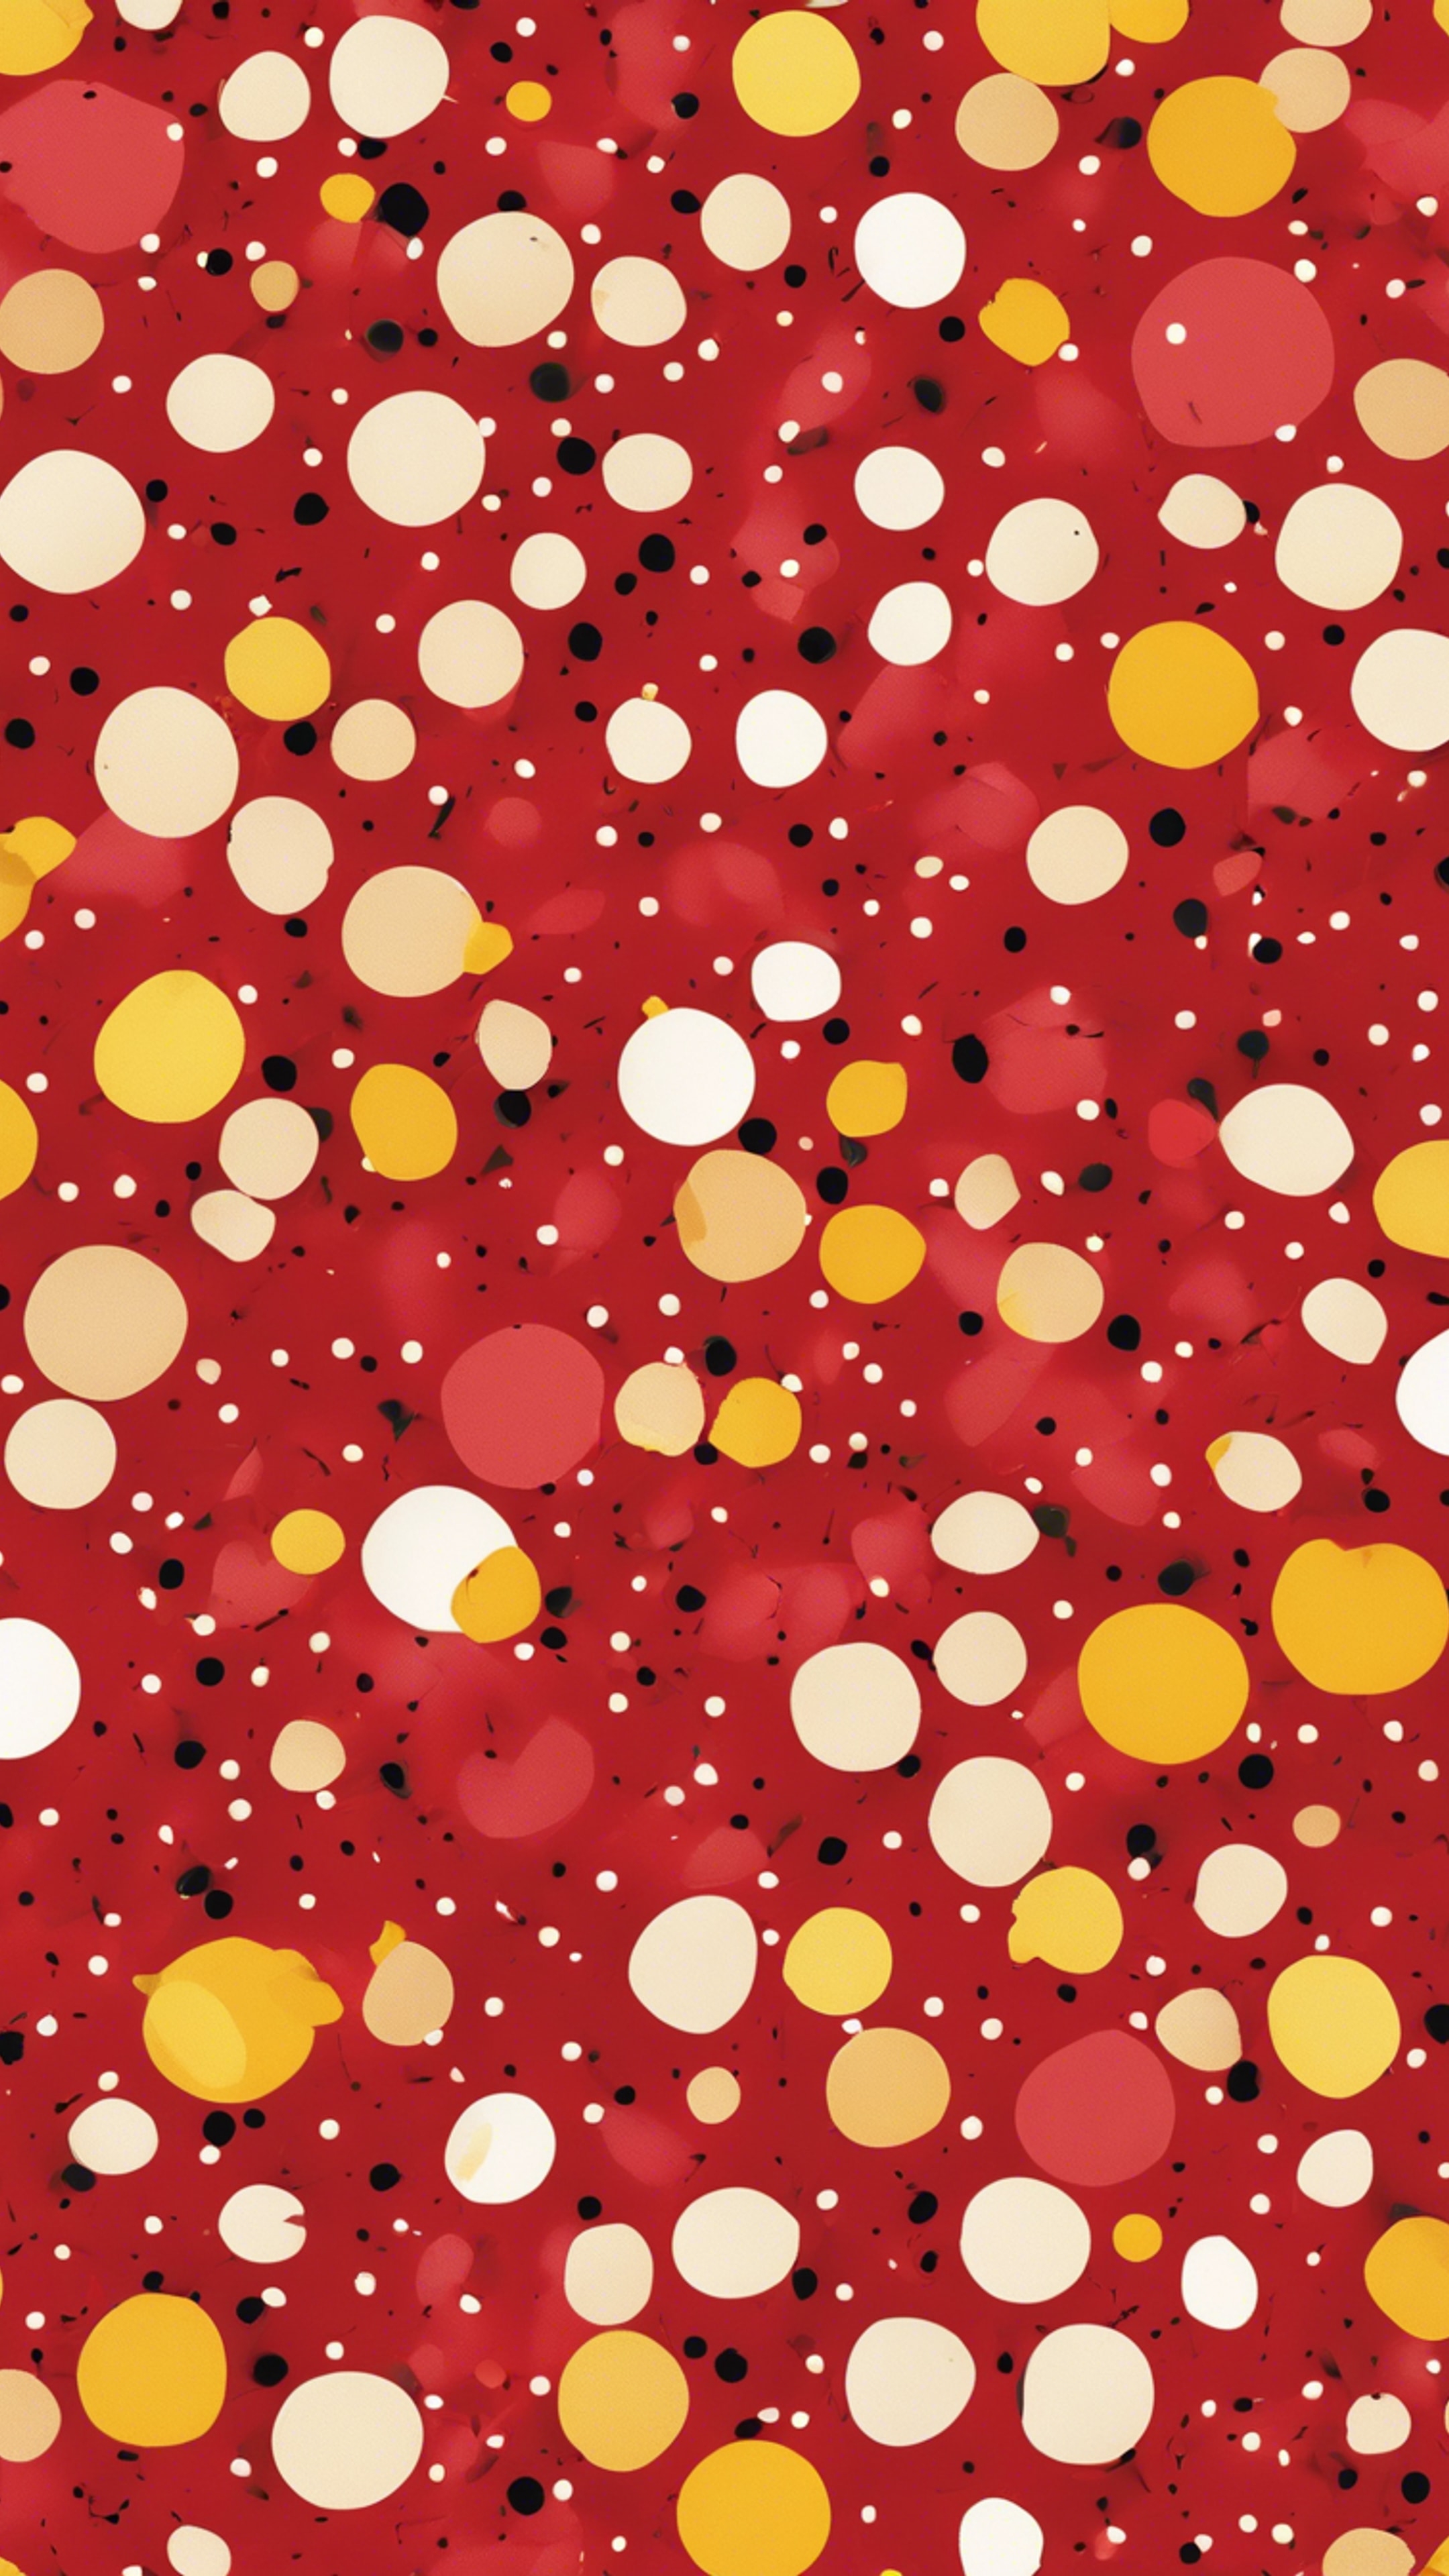 A seamless pattern of vibrant red and vivid yellow, polka dots scattered randomly. Валлпапер[206bafc01adc43569588]